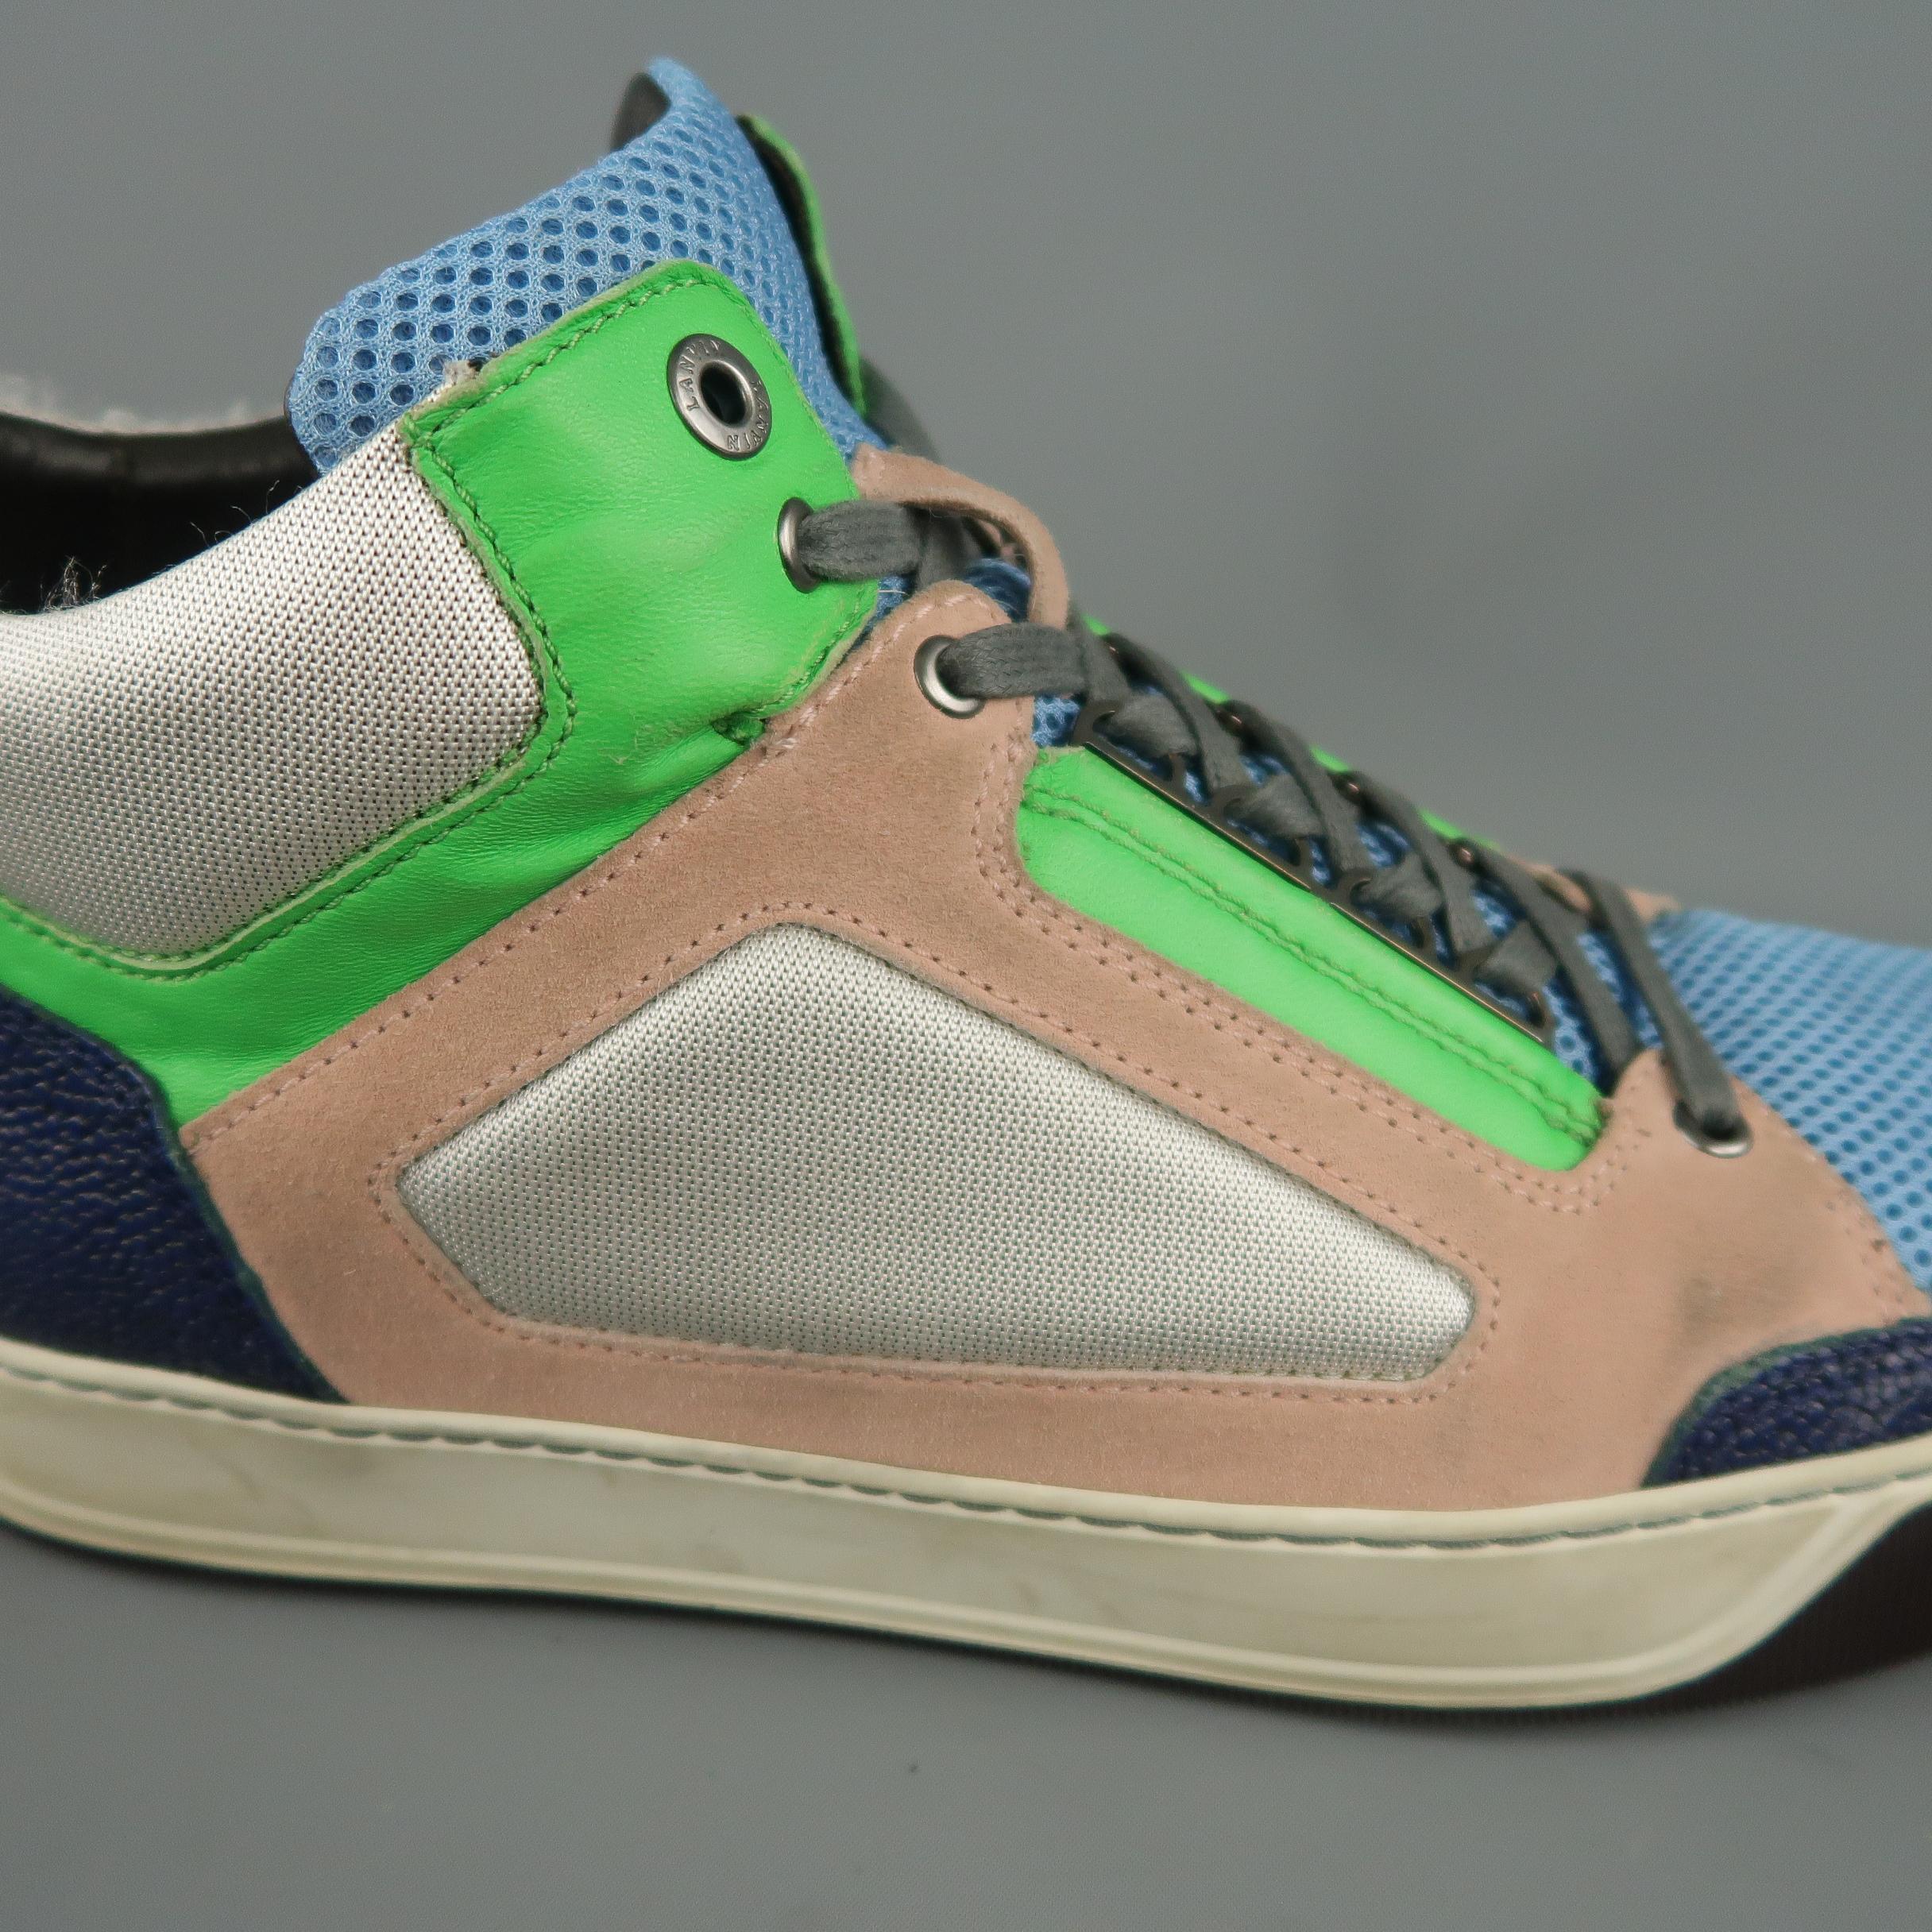 LANVIN color block high top sneakers feature a light blue mesh tongue and toe panel, navy textured leather trim and heel, muted blush pink suede sides, neon green leather trim, silver metallic canvas heel and side panels, and dual tone rubber sole.